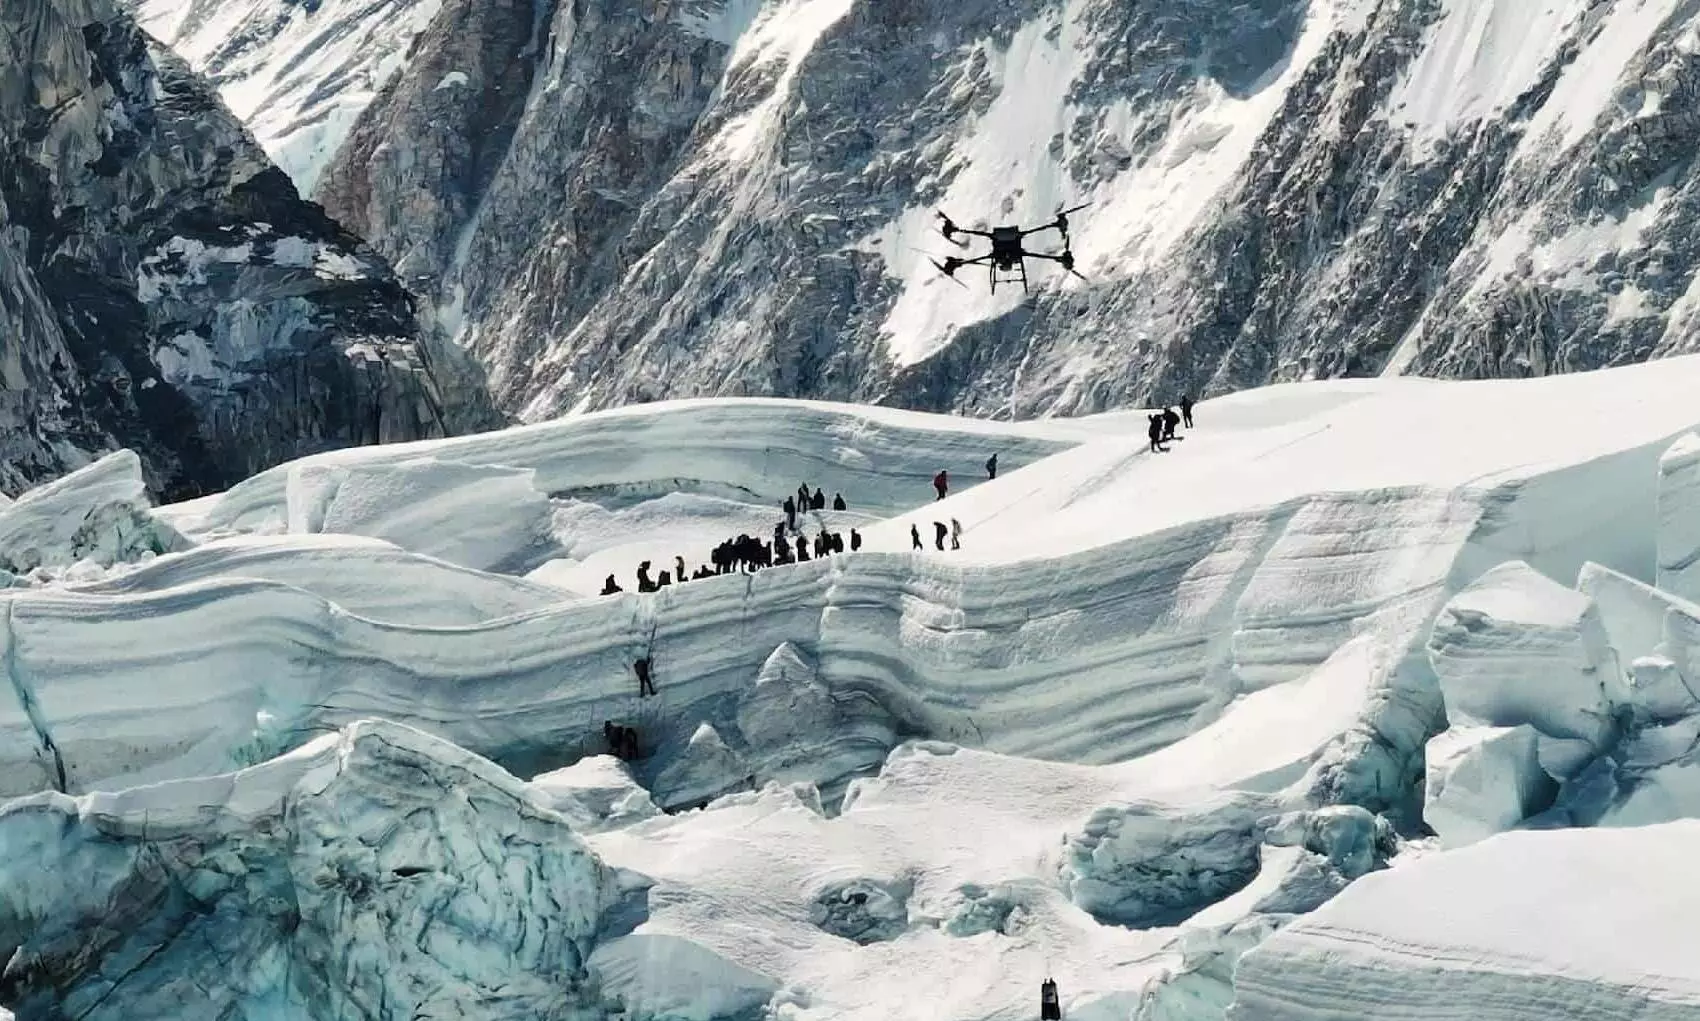 DJI drone makes historic delivery on Mount Everest